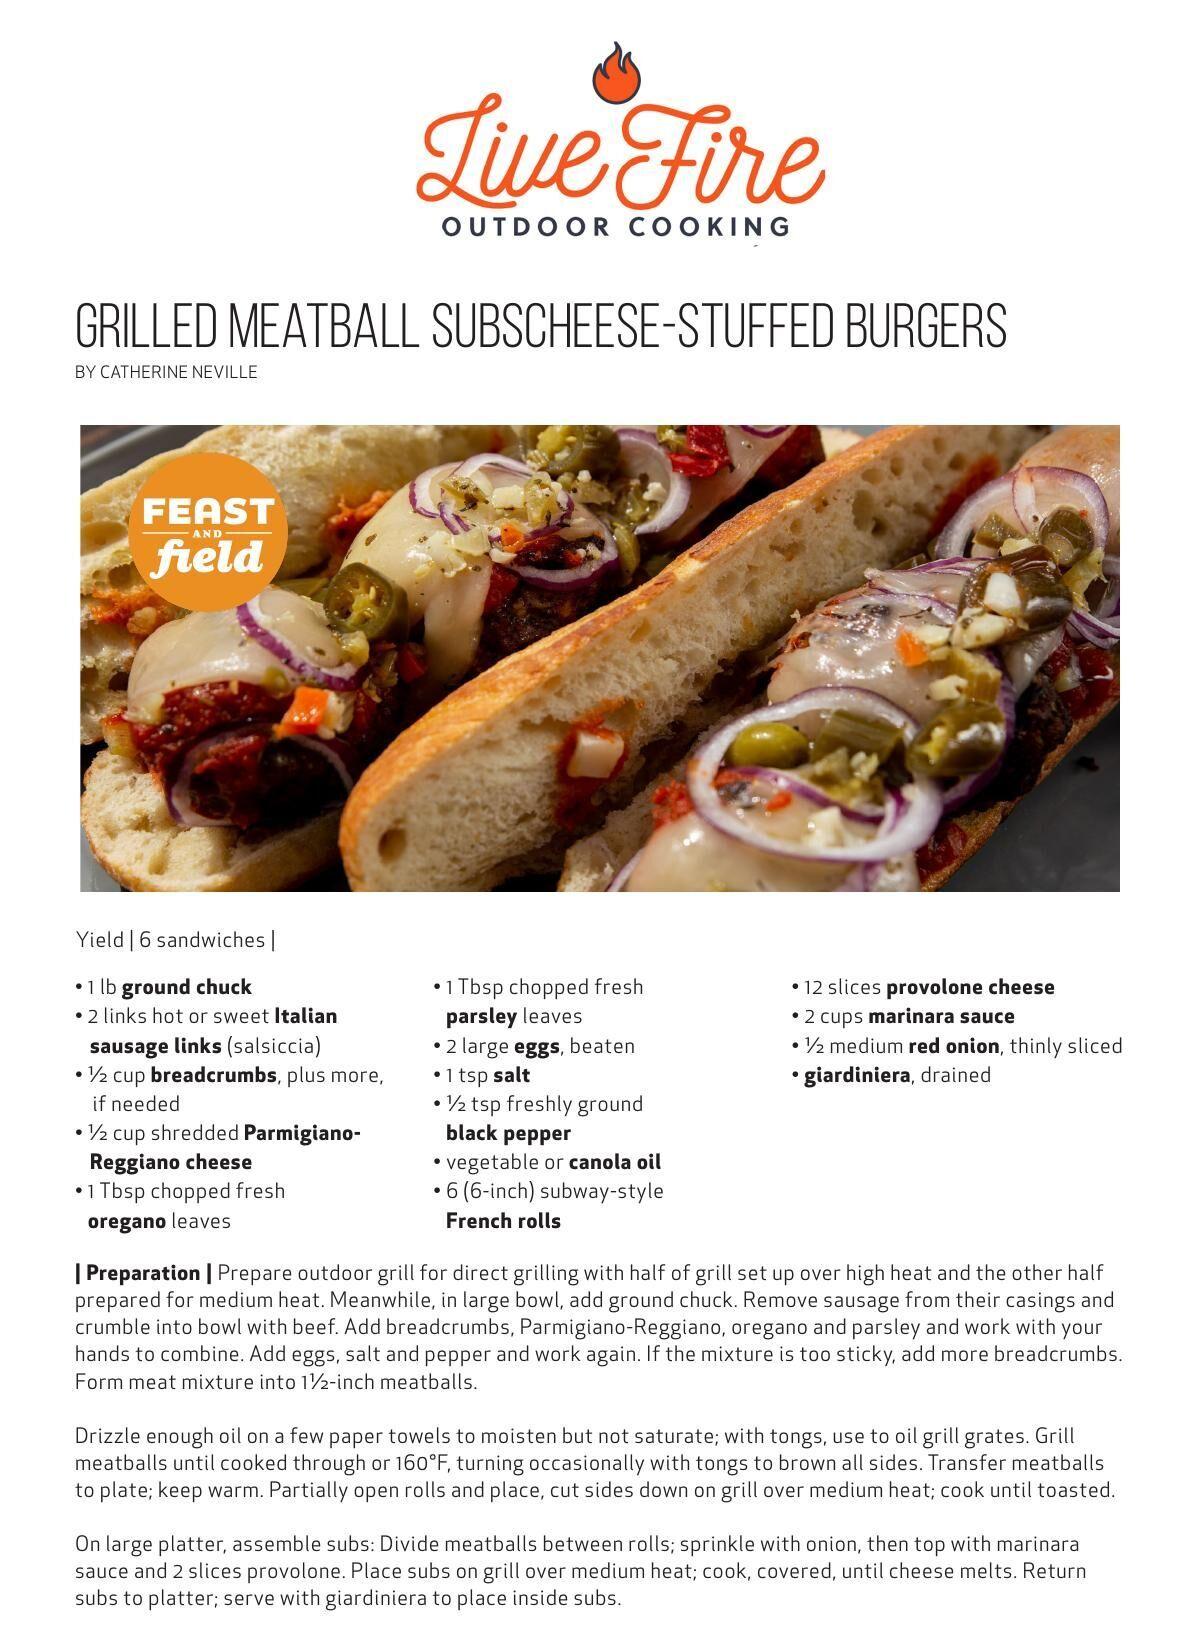 Download the Grilled Meatball Subs recipe